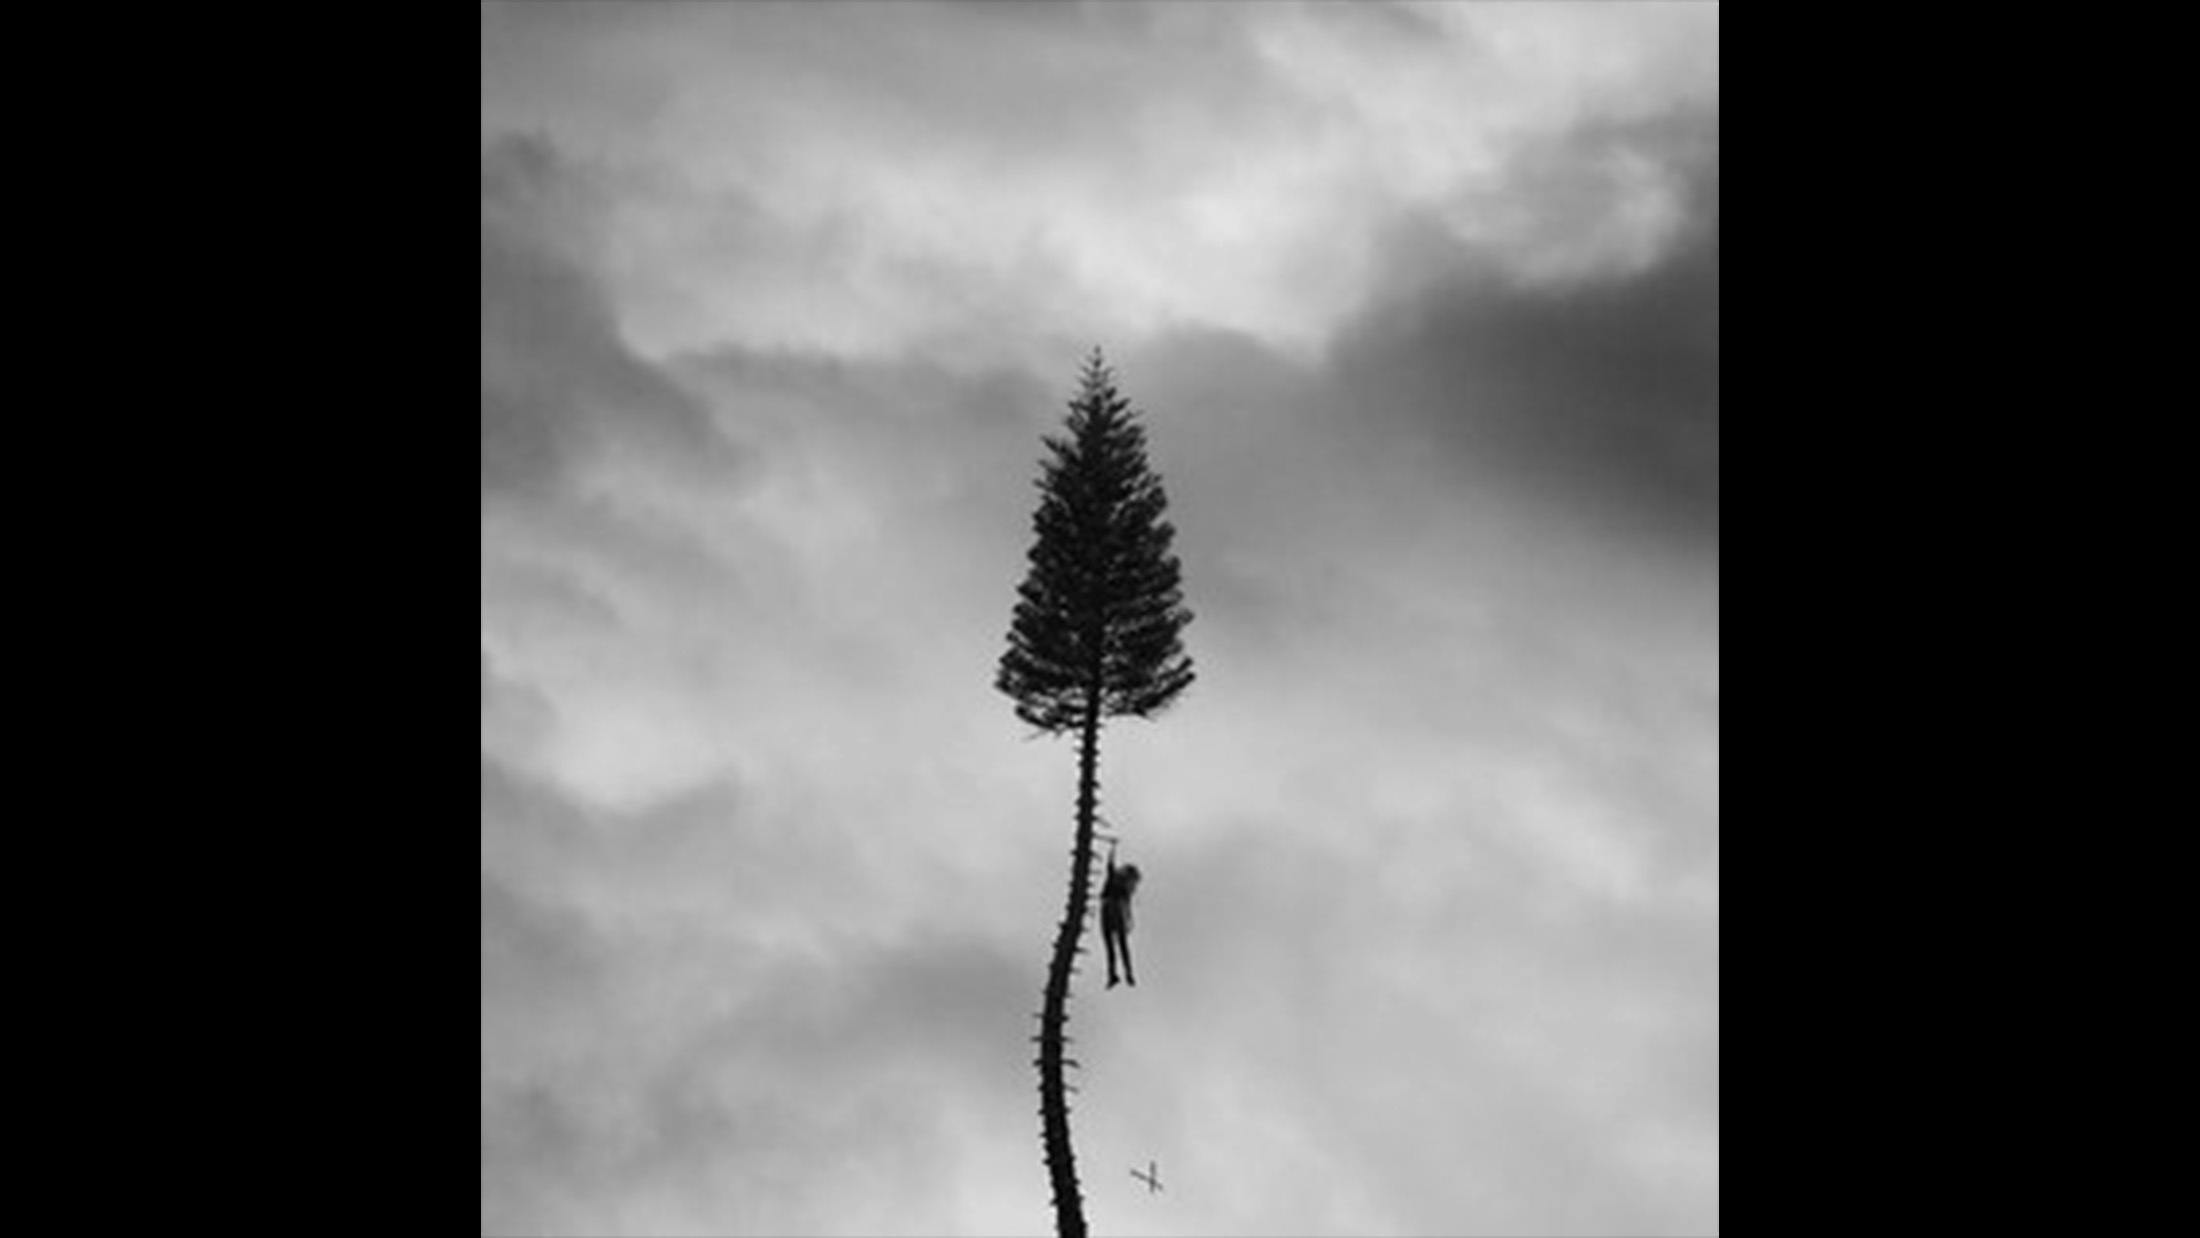 ‘This is temporary, I just heard I’m gonna be a dad,’ is a subtle line, but it’s the pivotal crisis in a record caught between God and neutrinos, birth and decay. Manchester Orchestra’s fifth LP proved not only their most expansive, painted in electronic textures and burnished acoustics, but also their most gracefully cathartic offering.